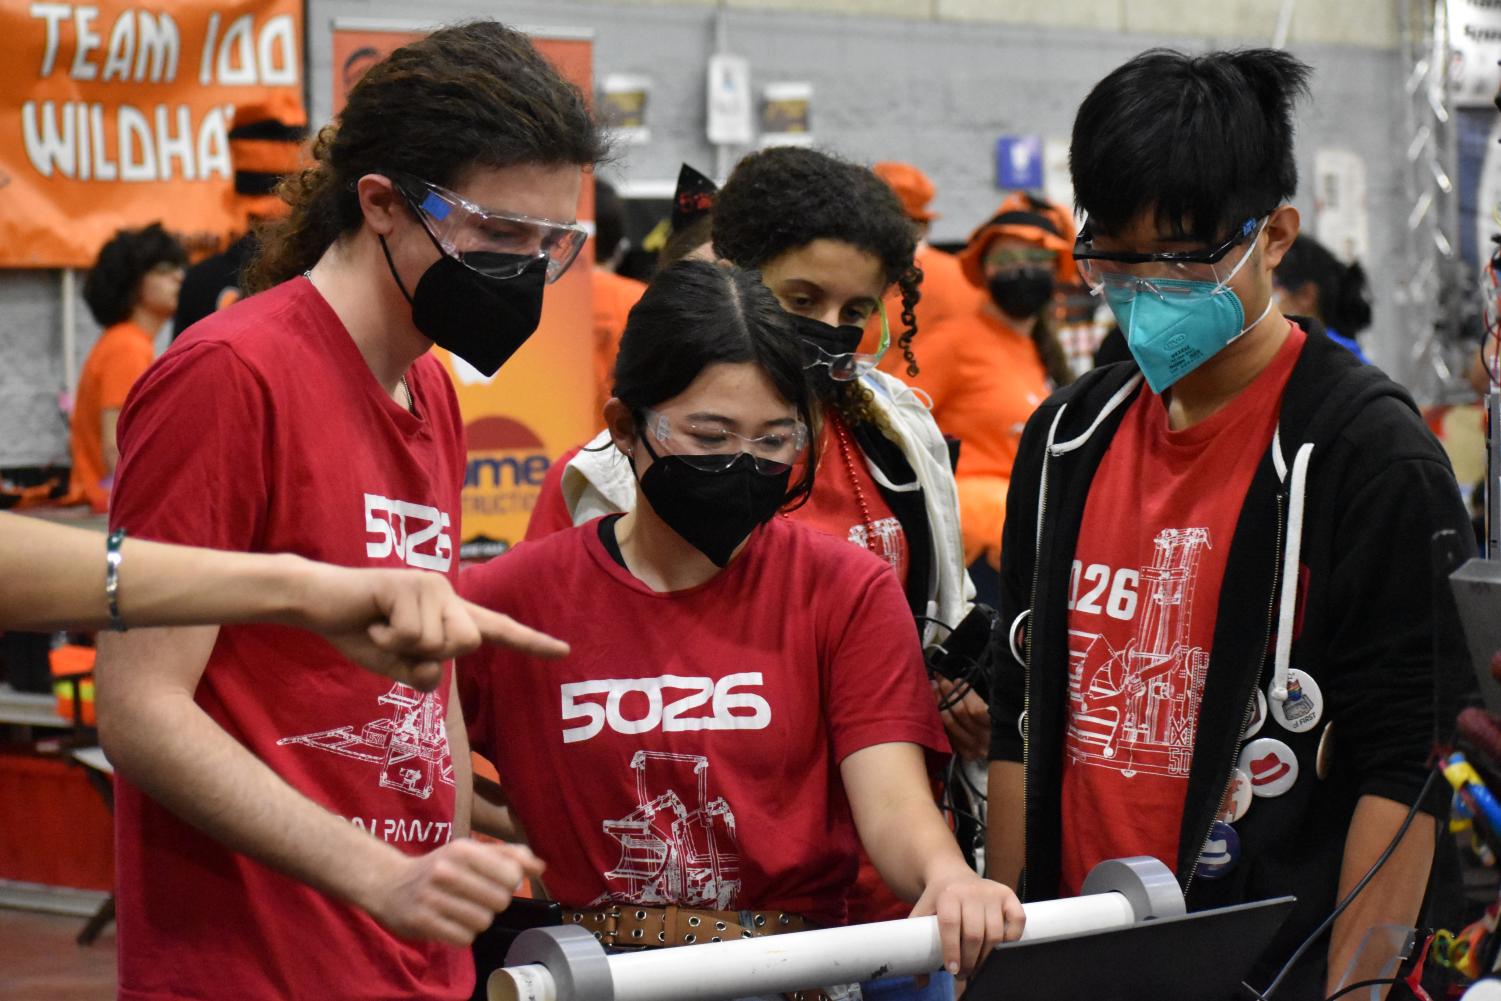 Iron+Panthers+push+through+obstacles+to+semifinal+finish+in+Central+Valley+robotics+competition